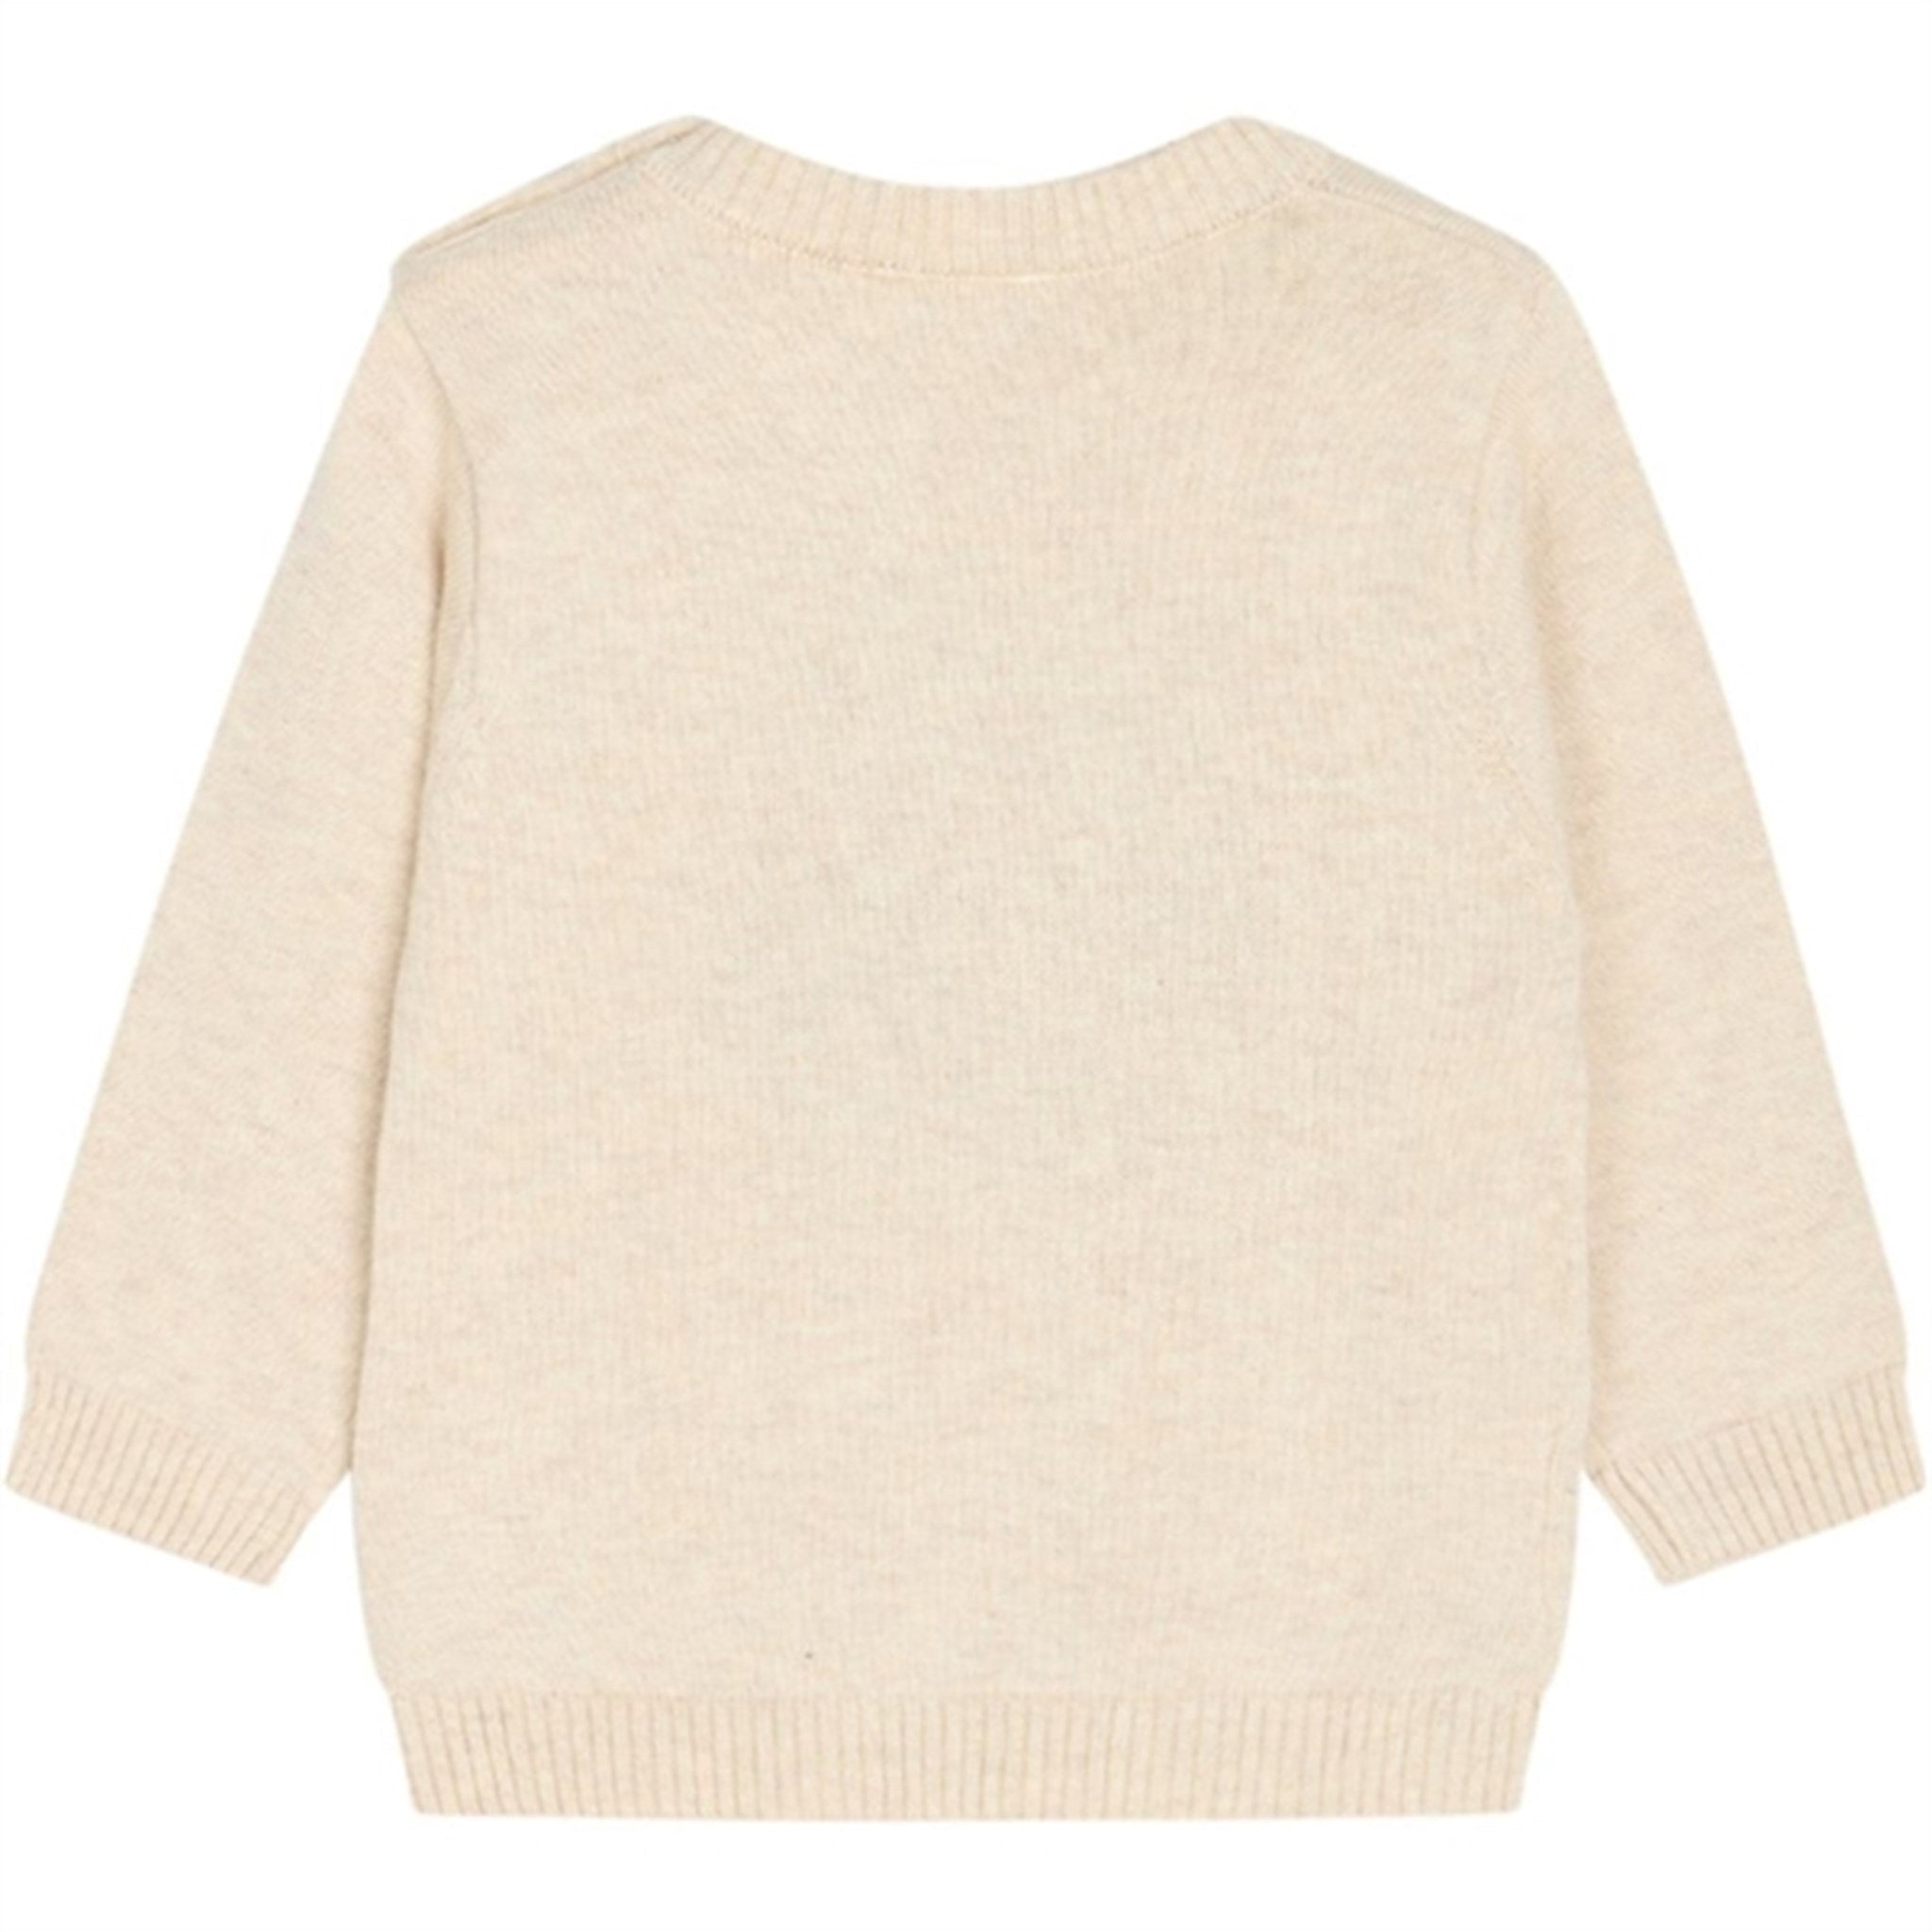 Hust & Claire Baby Wheat Melange Pilou Knit Sweater 2